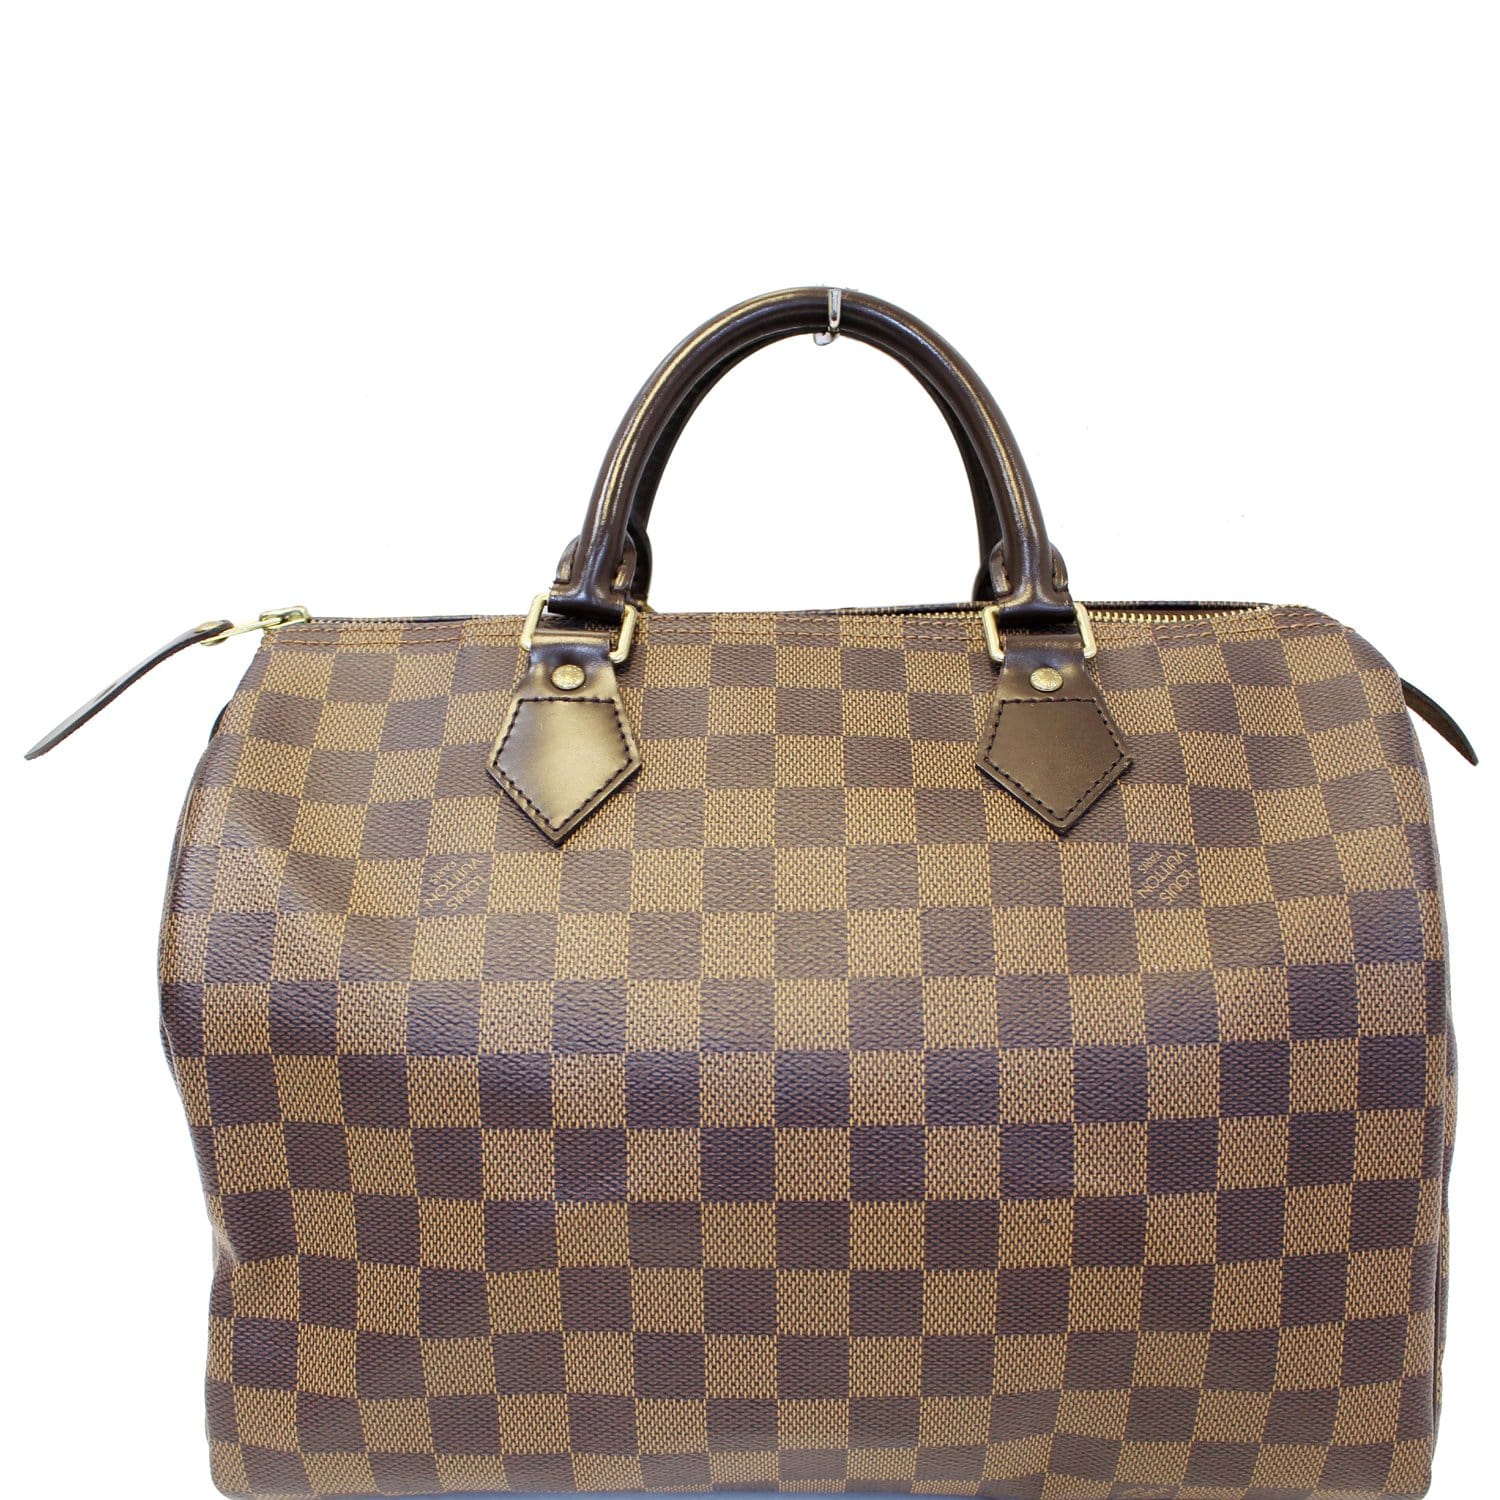 Authentic Pre-owned Louis Vuitton speedy 30 Damier Ebene for